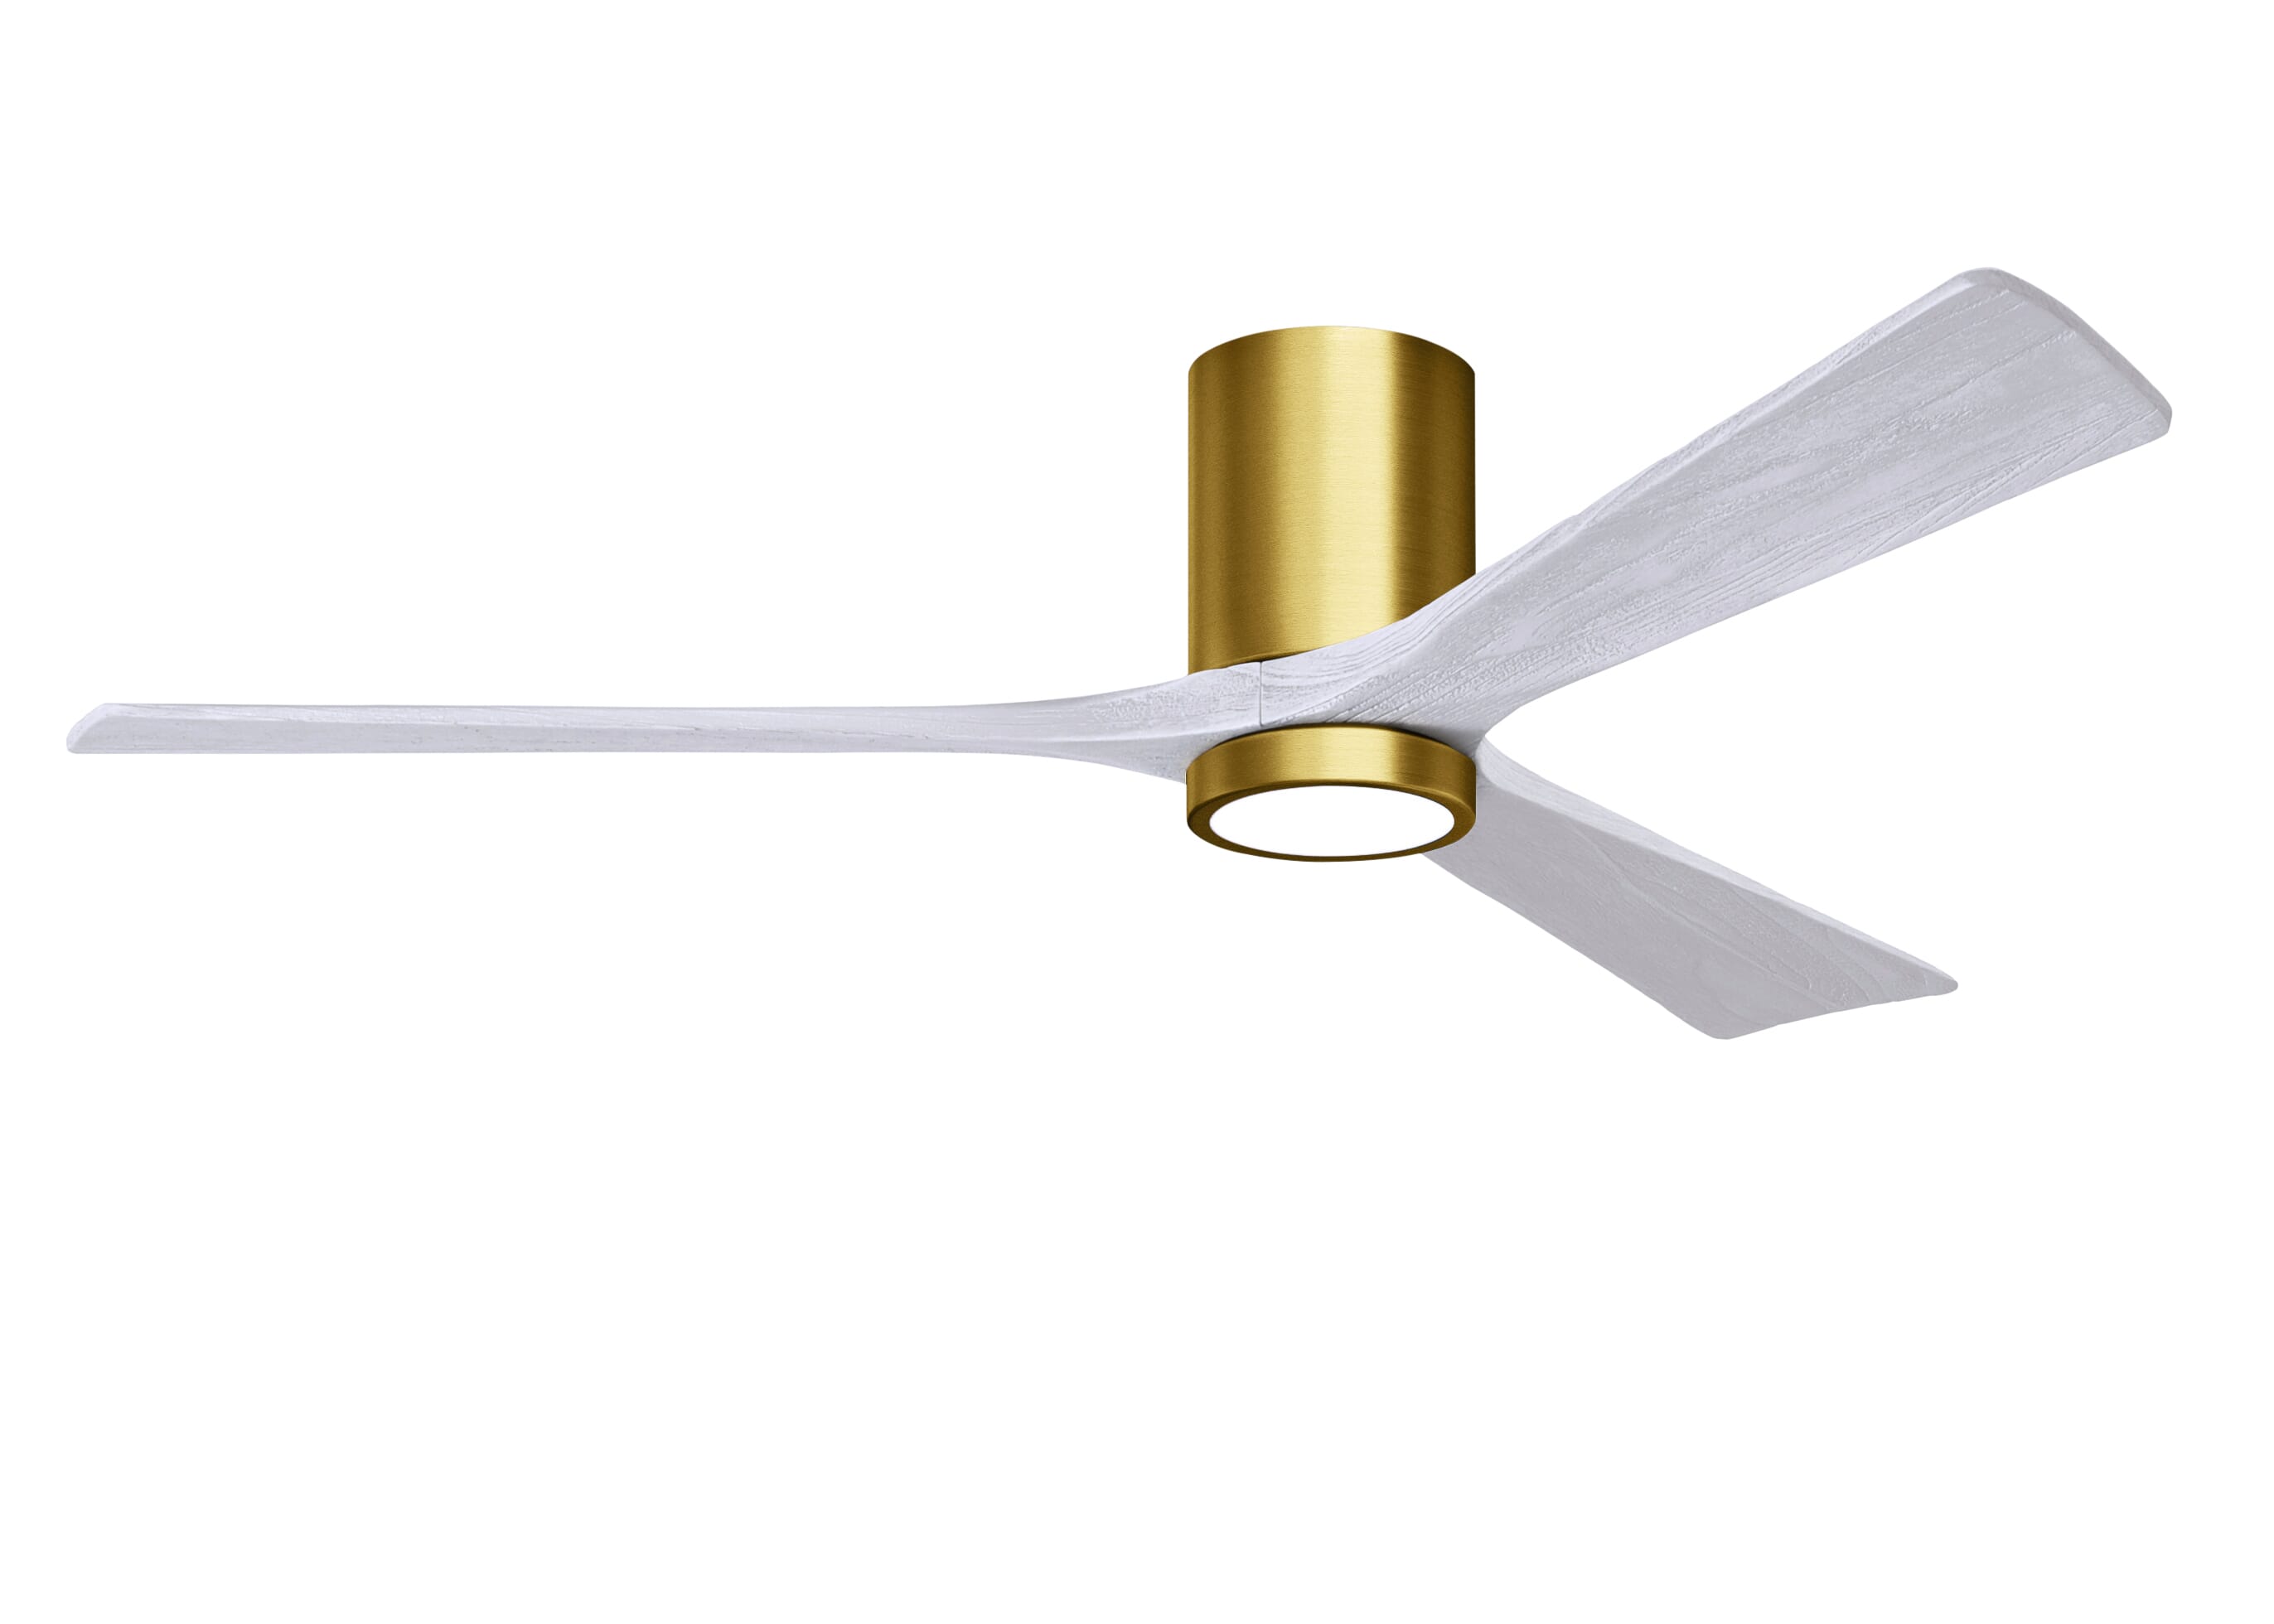 Irene 6-Speed DC 60"" Ceiling Fan w/ Integrated Light Kit in Brushed Brass with Matte White blades -  Matthews Fan Company, IR3HLK-BRBR-MWH-60